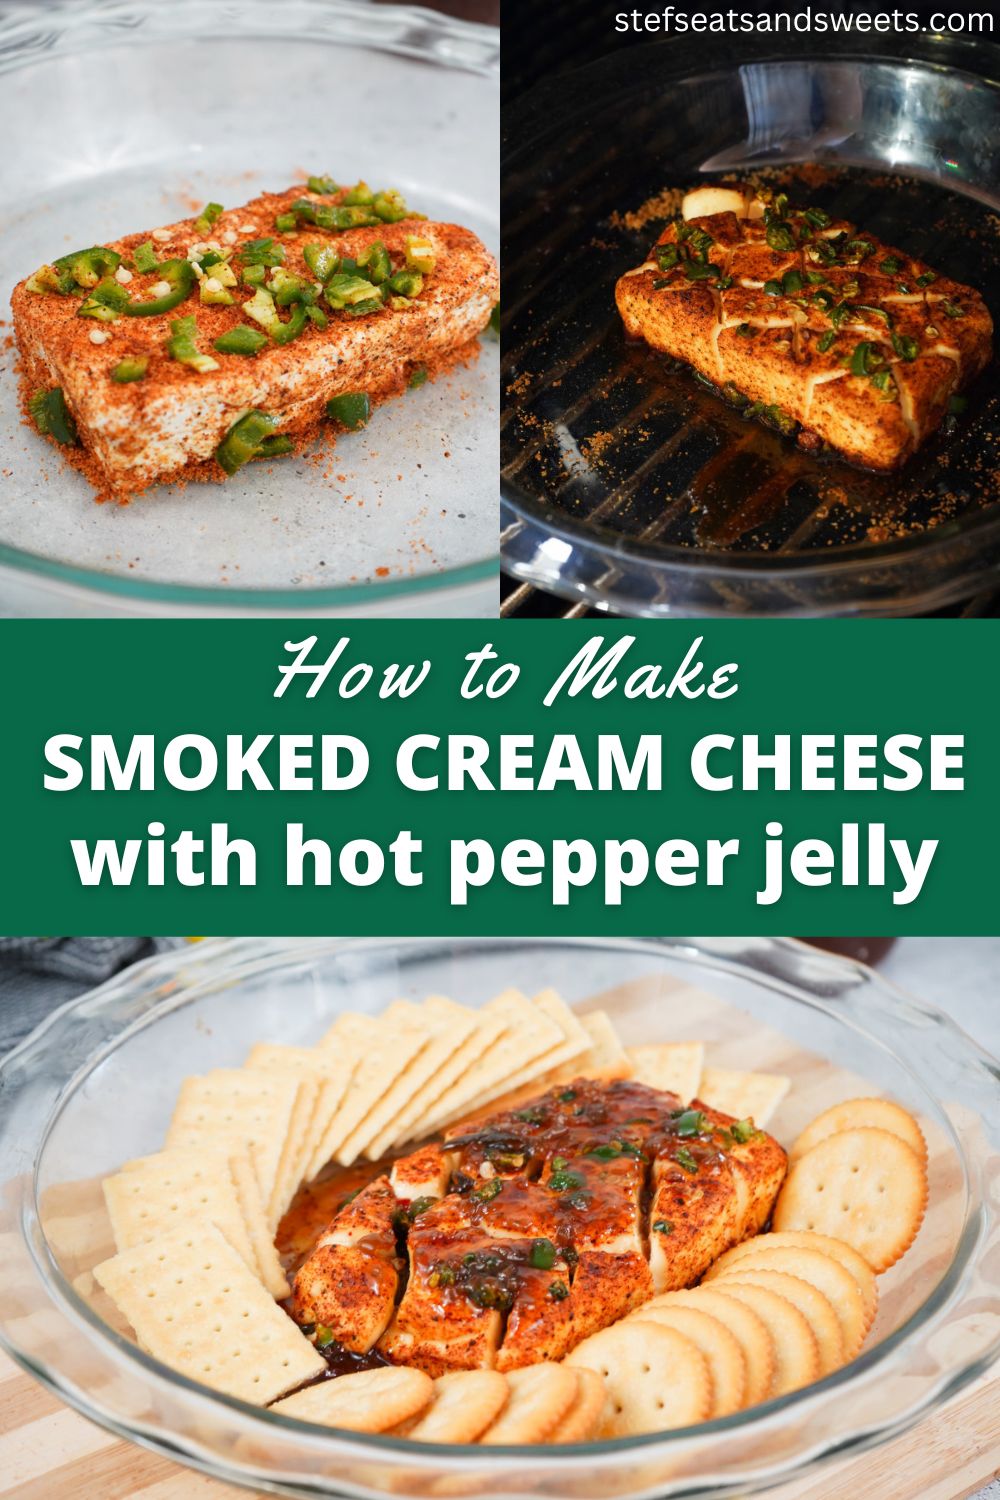 How to make smoked cream cheese with hot pepper jelly